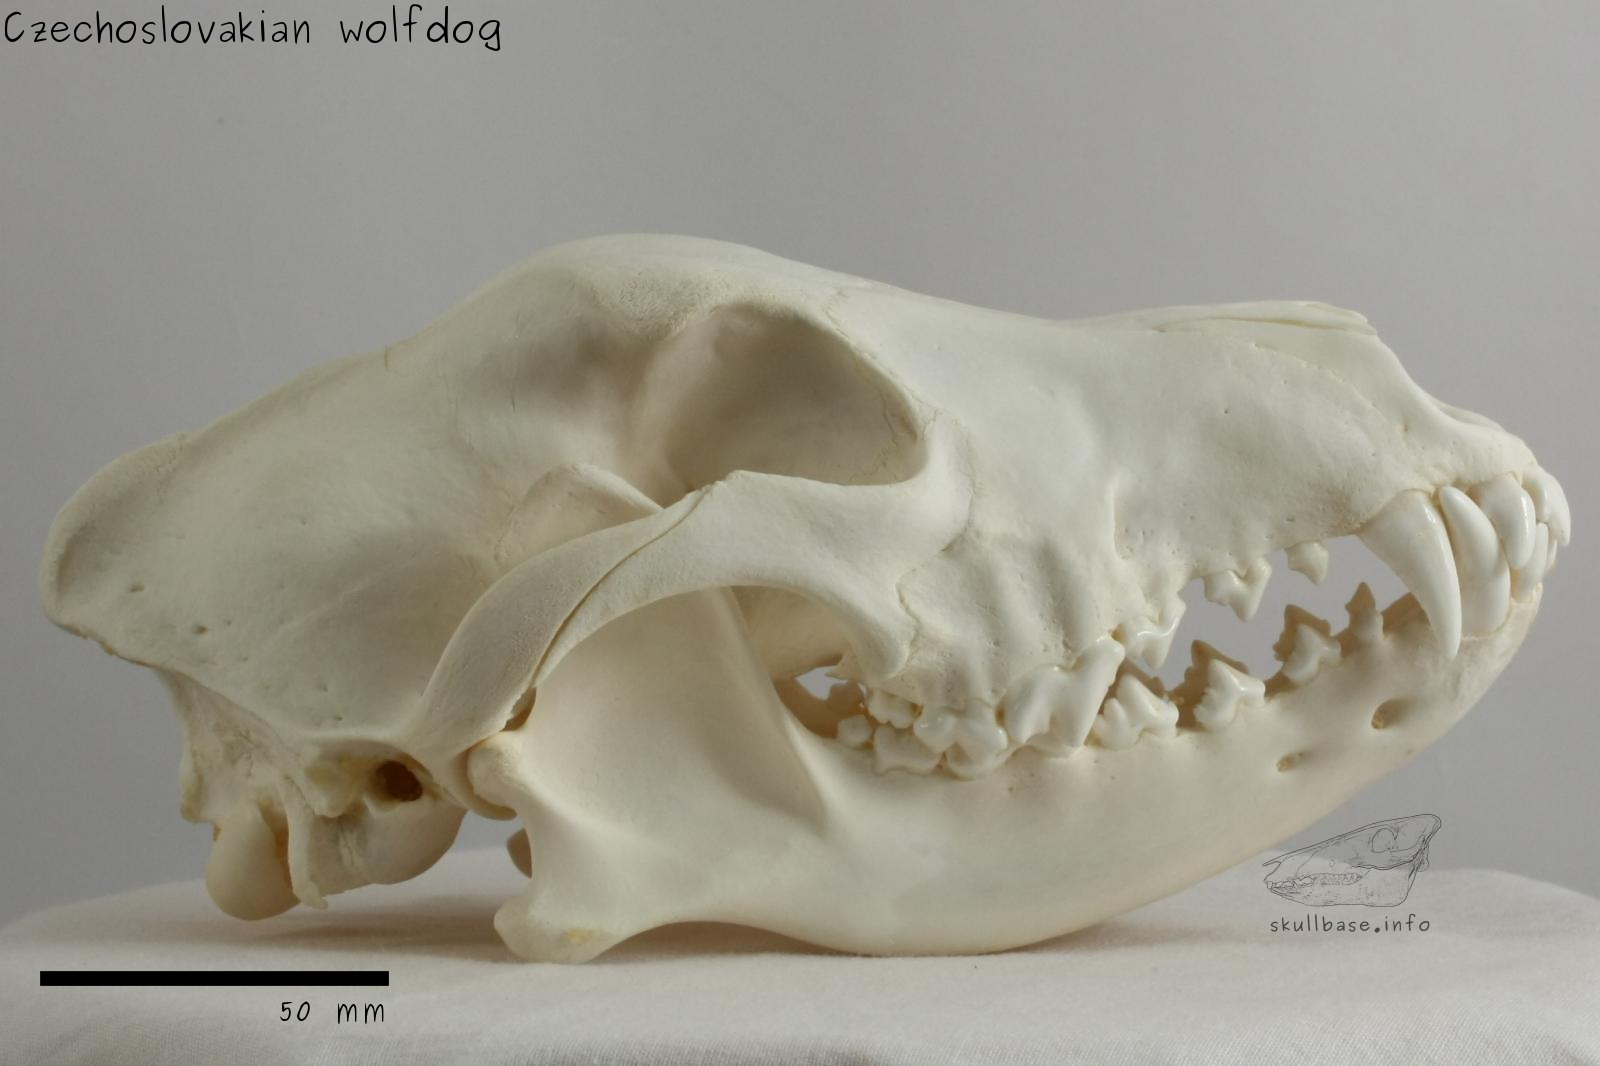 Czechoslovakian wolfdog (Canis lupus familiaris) skull lateral view